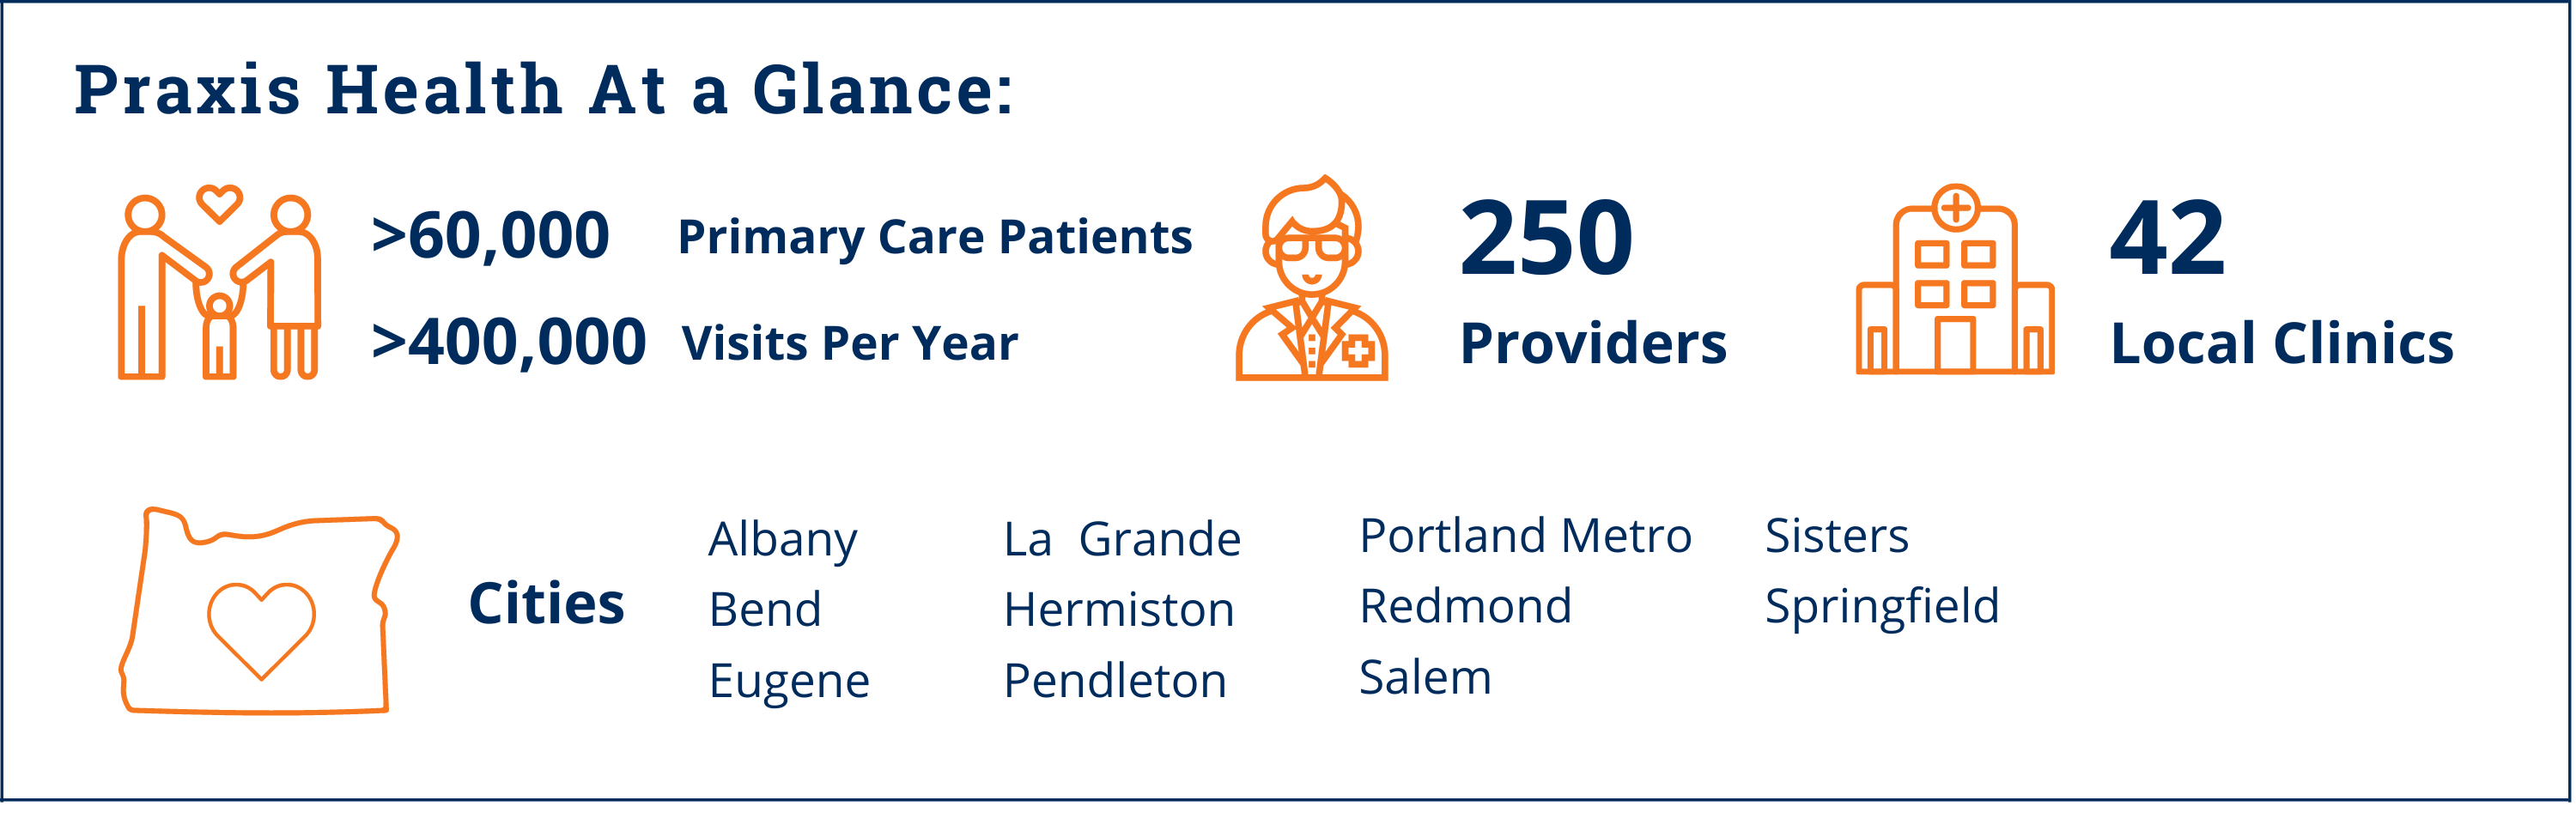 Praxis Health at a Glance | Albany Primary Care